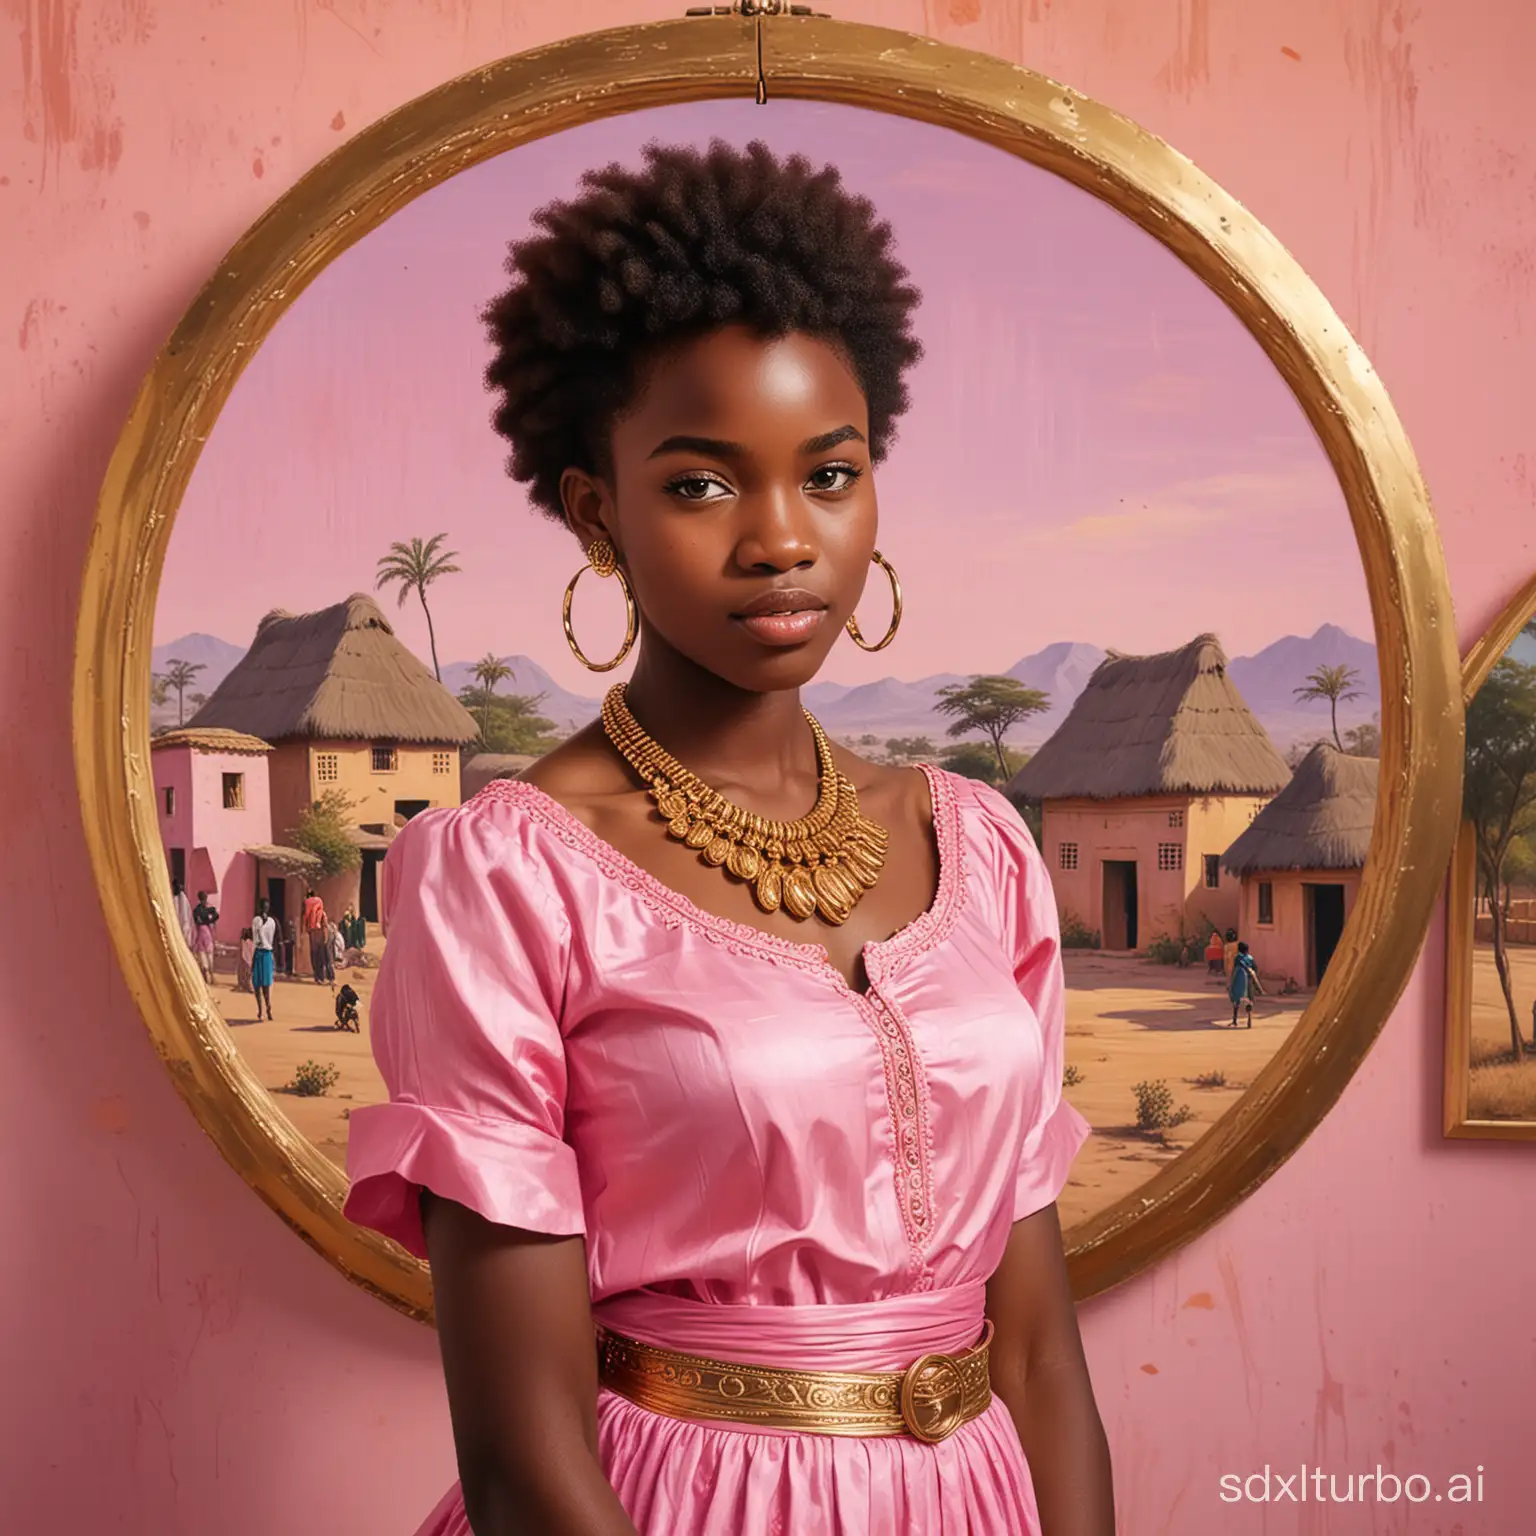 Royal-African-Black-Teen-Portrait-Vibrant-Pink-Dress-and-Playful-Expression-in-Village-Setting